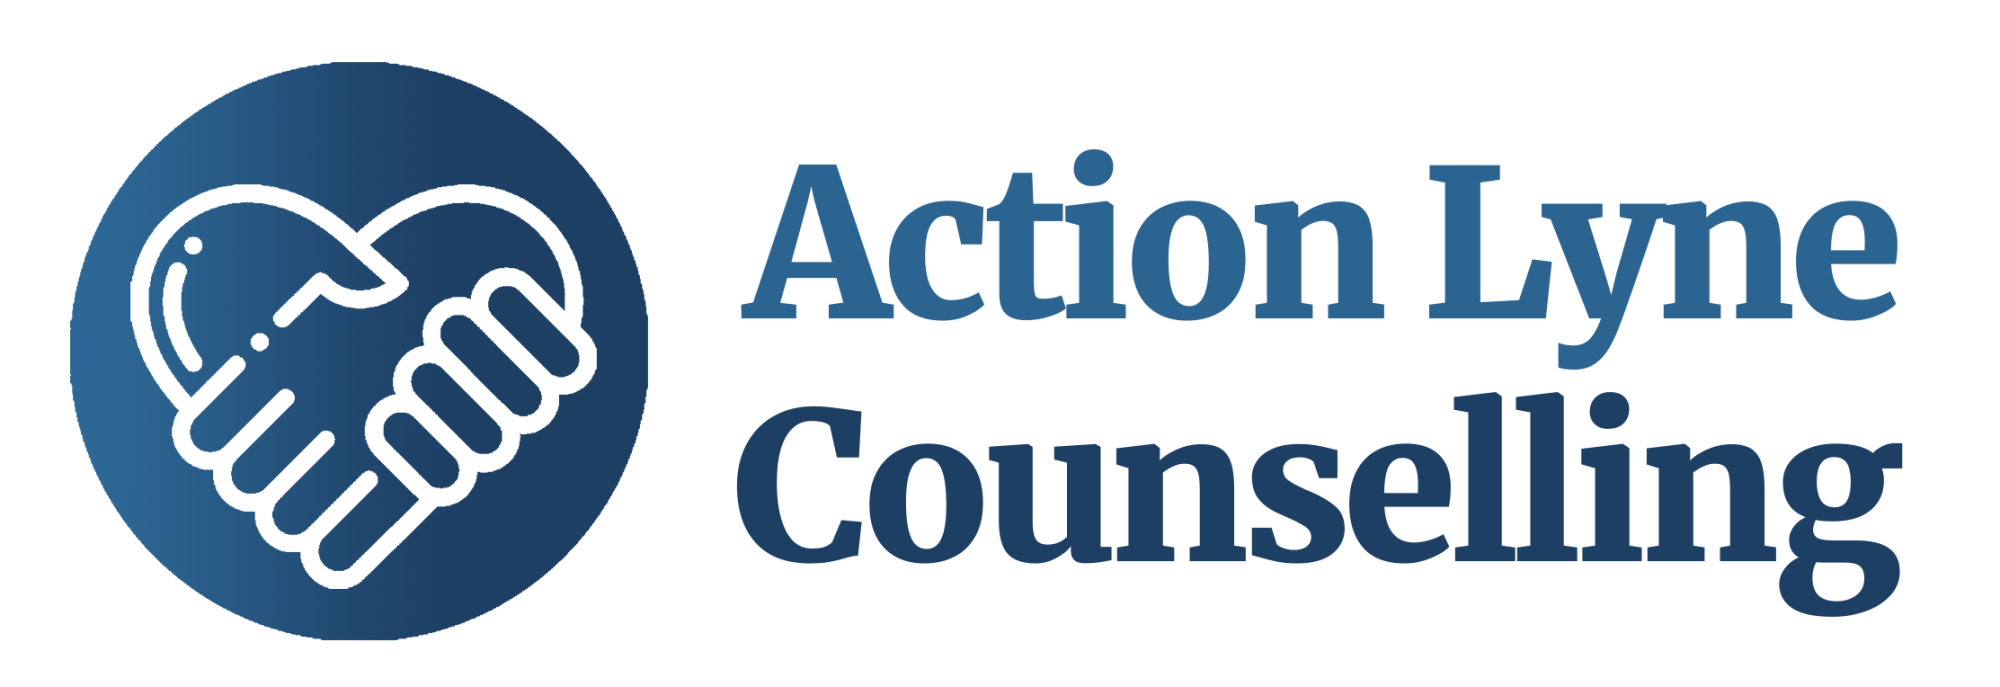 Action Lyne Counselling & Final Logo